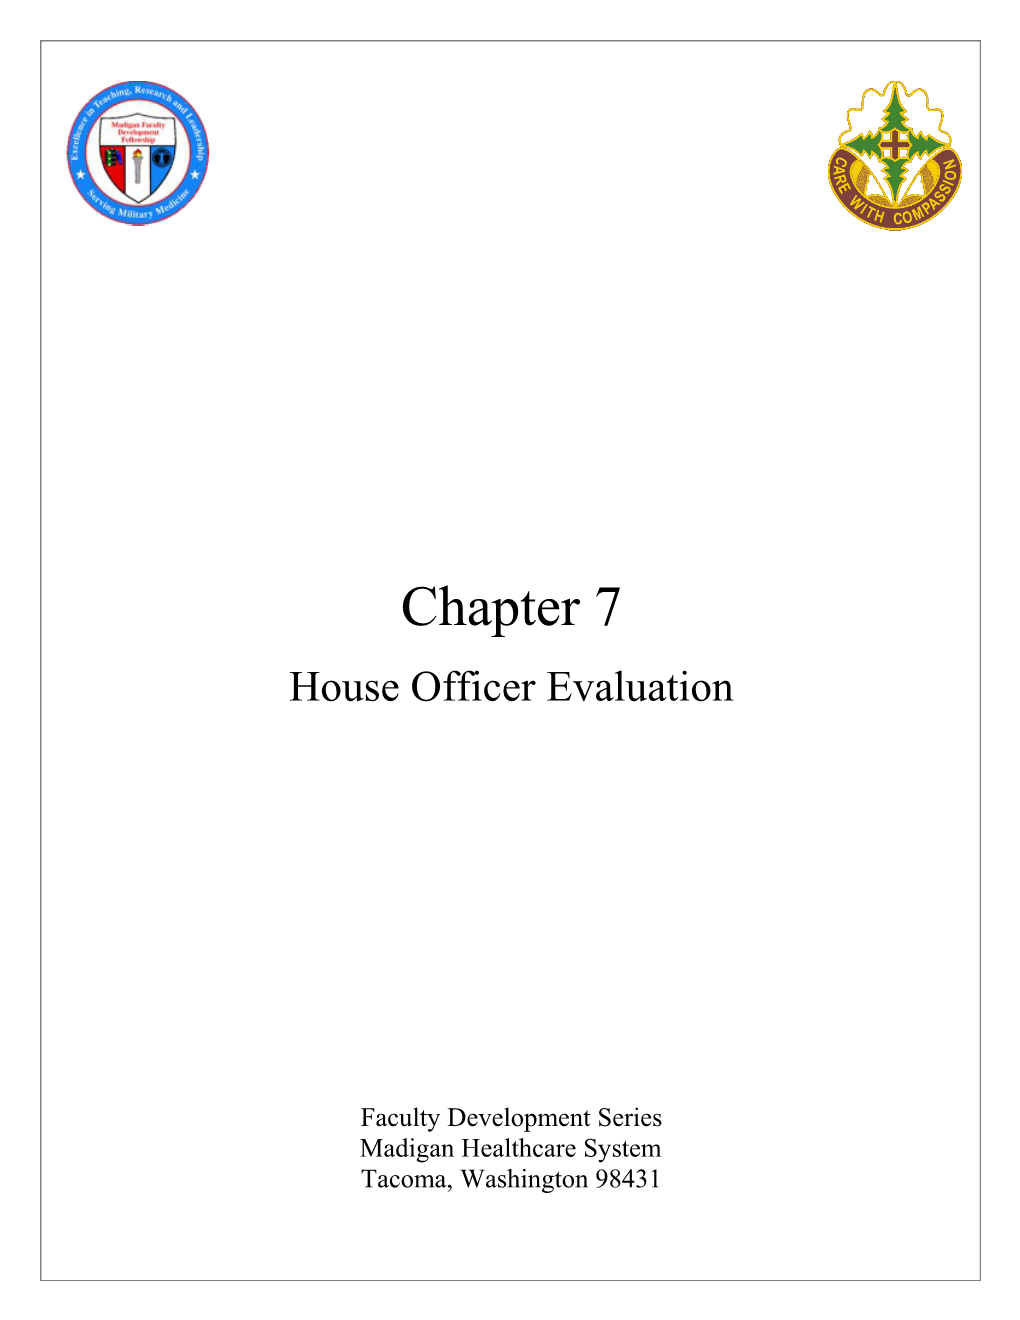 House Officer Evaluation